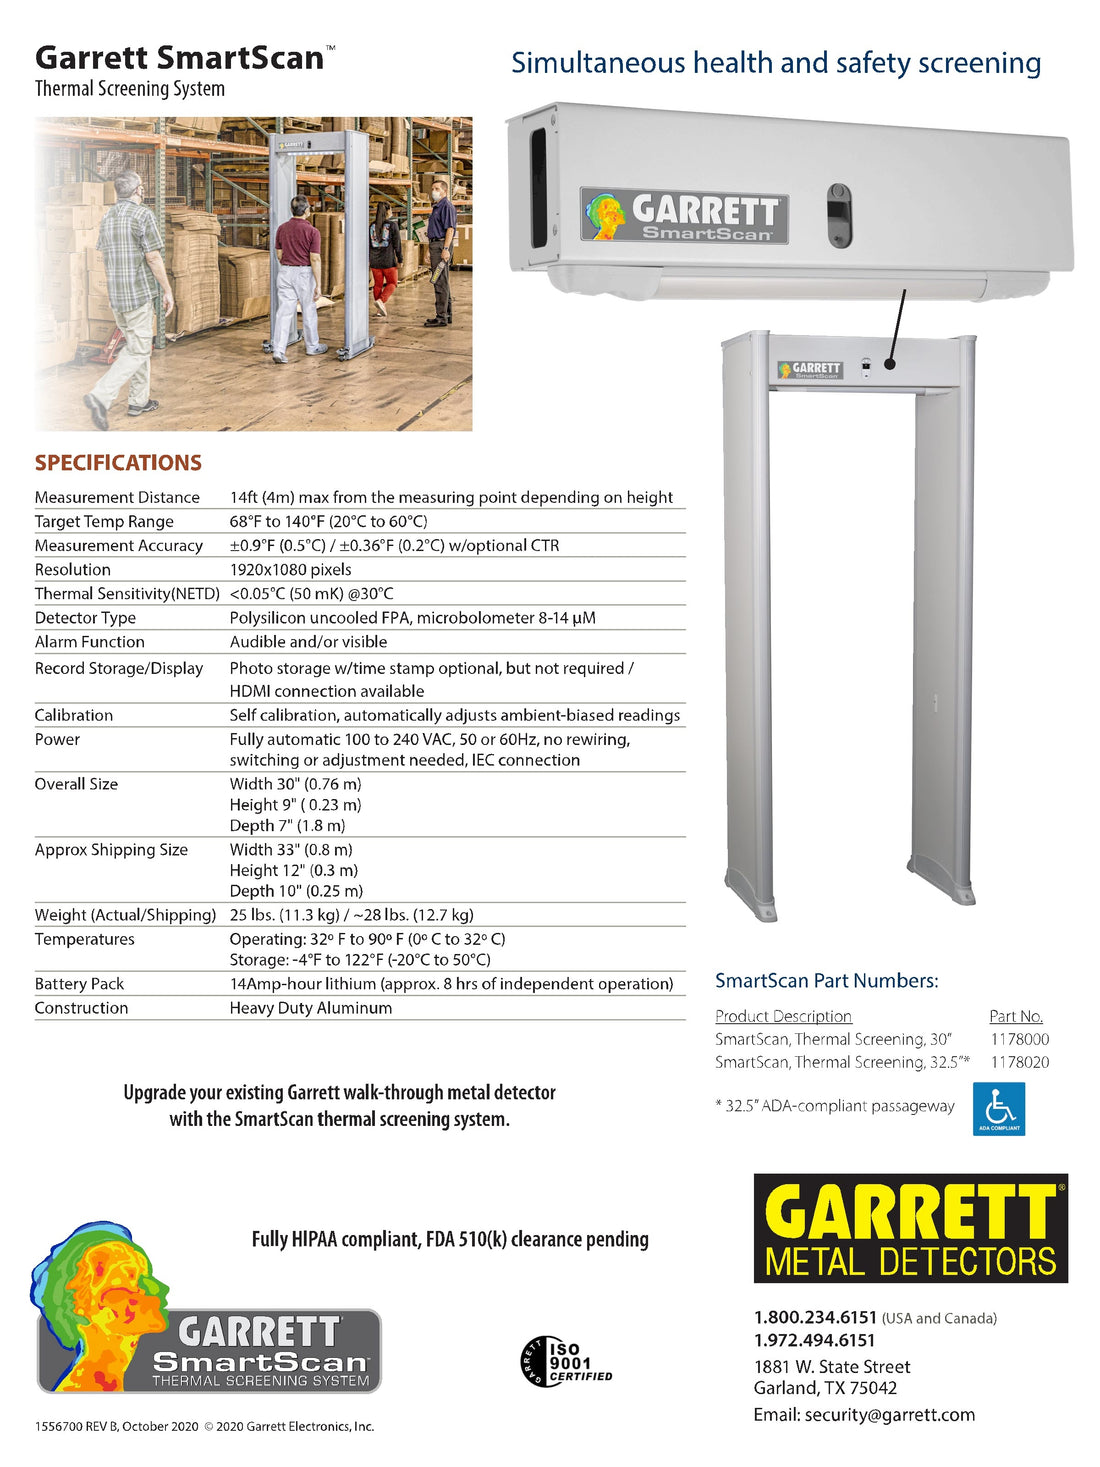 Garrett SmartScan 32.5" ADA Compliant Thermal Screening Add-On for PD 6500i and Multi Zone Specifications B